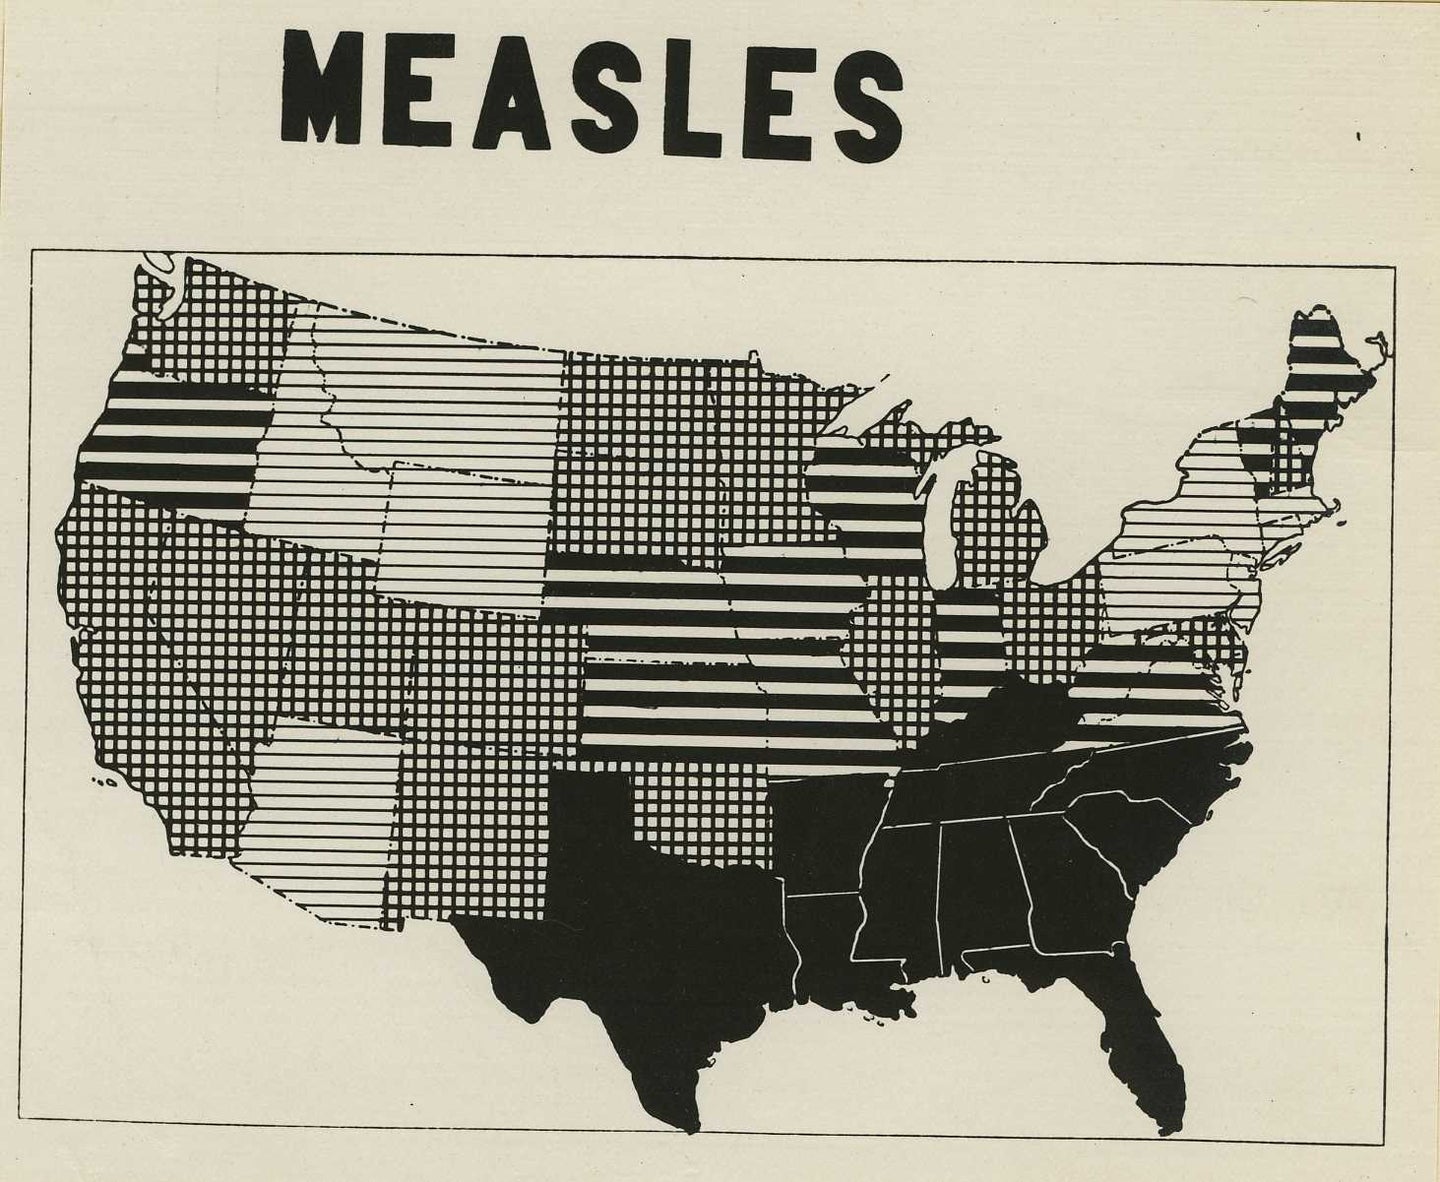 The U.S. could lose its measles elimination status